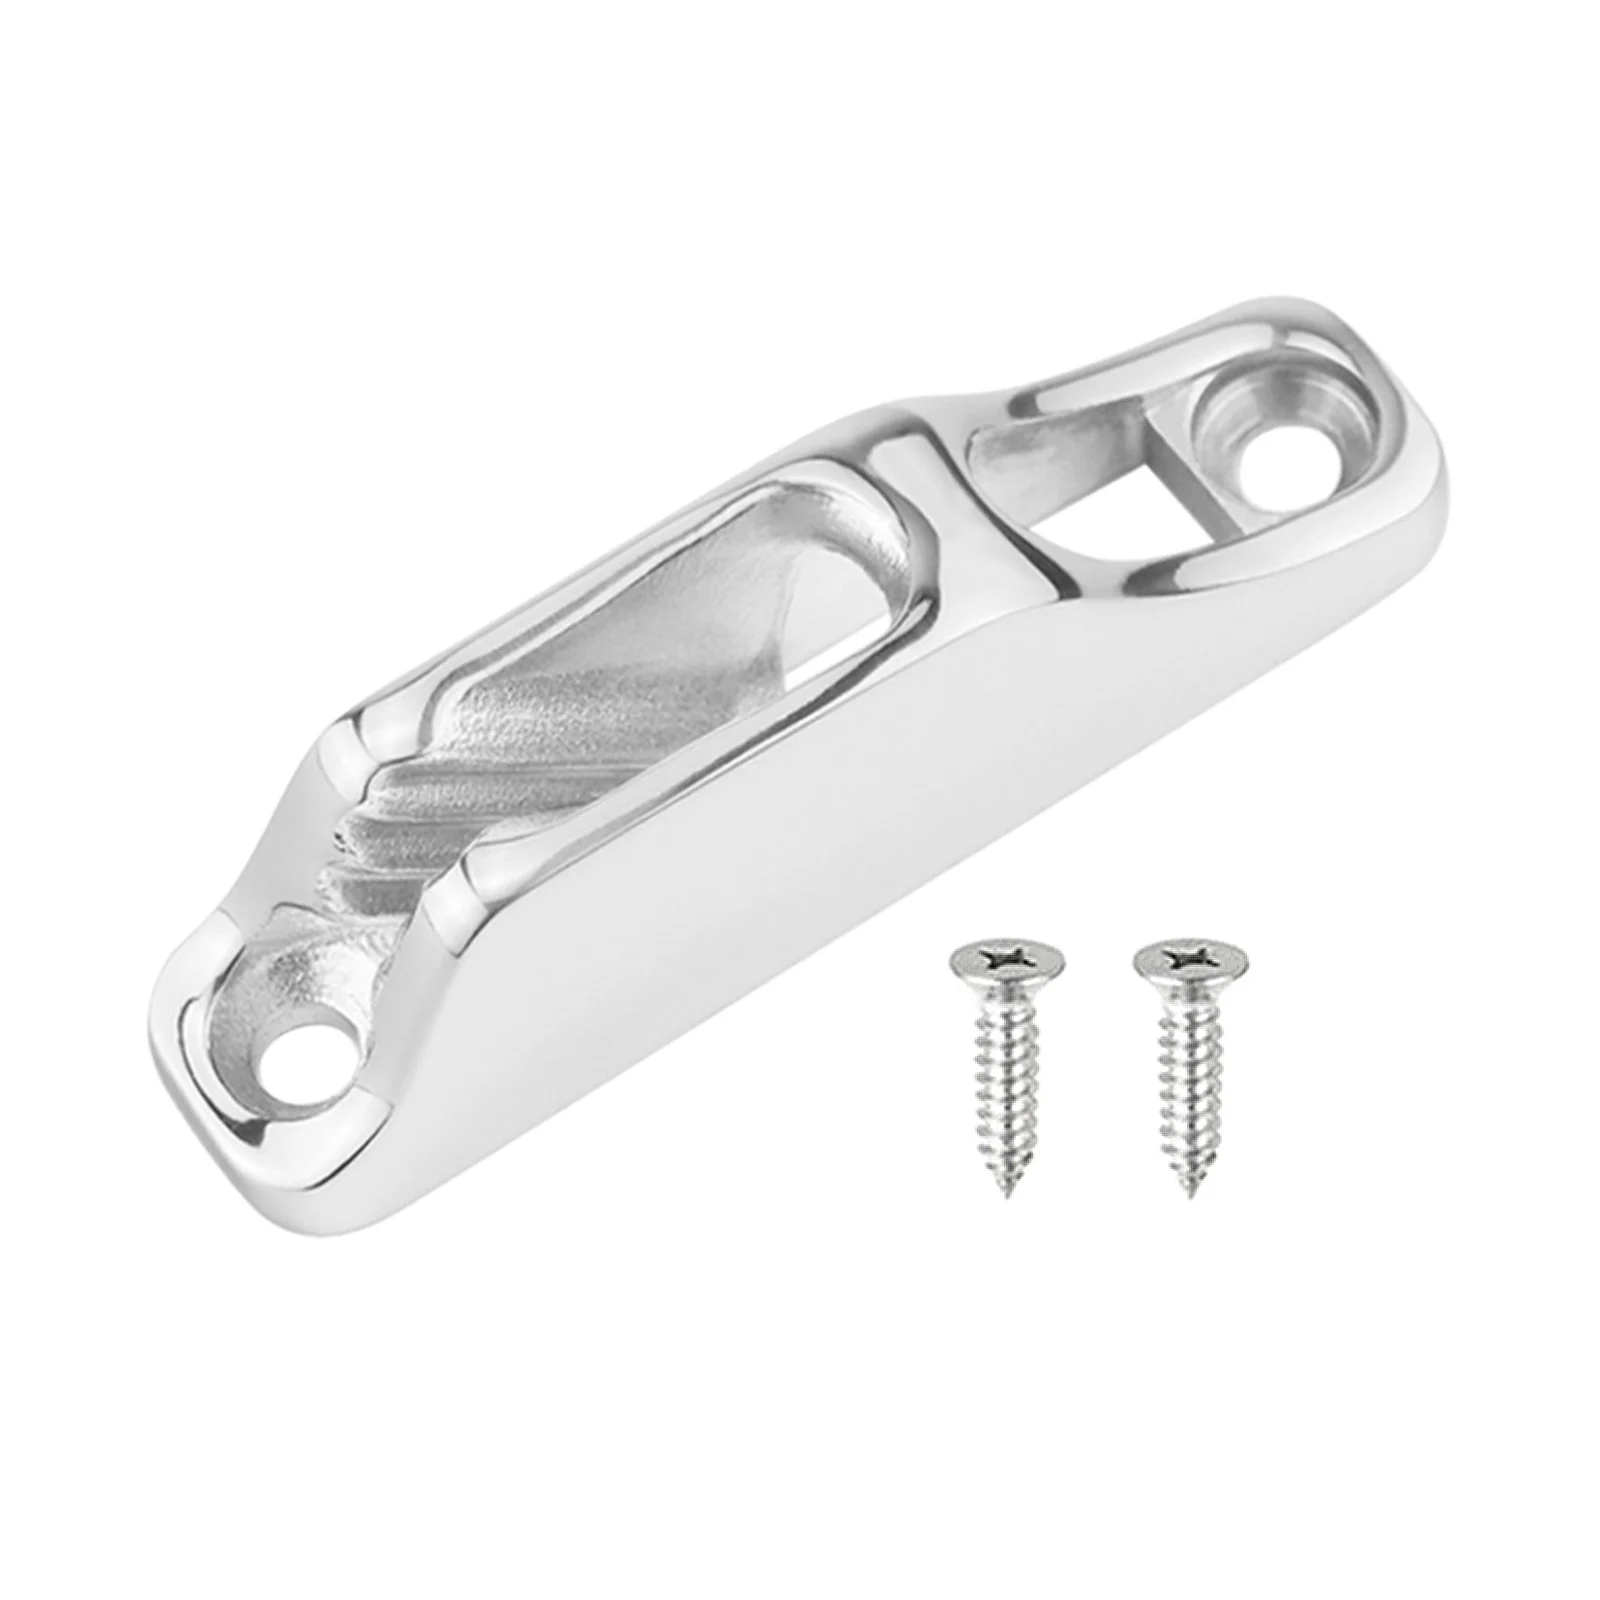 REOUG Base,316 Stainless Steel Boat Clam Cleat Rope Cleat Jam Cleat Line Cleat Marine Hardware Accessories 